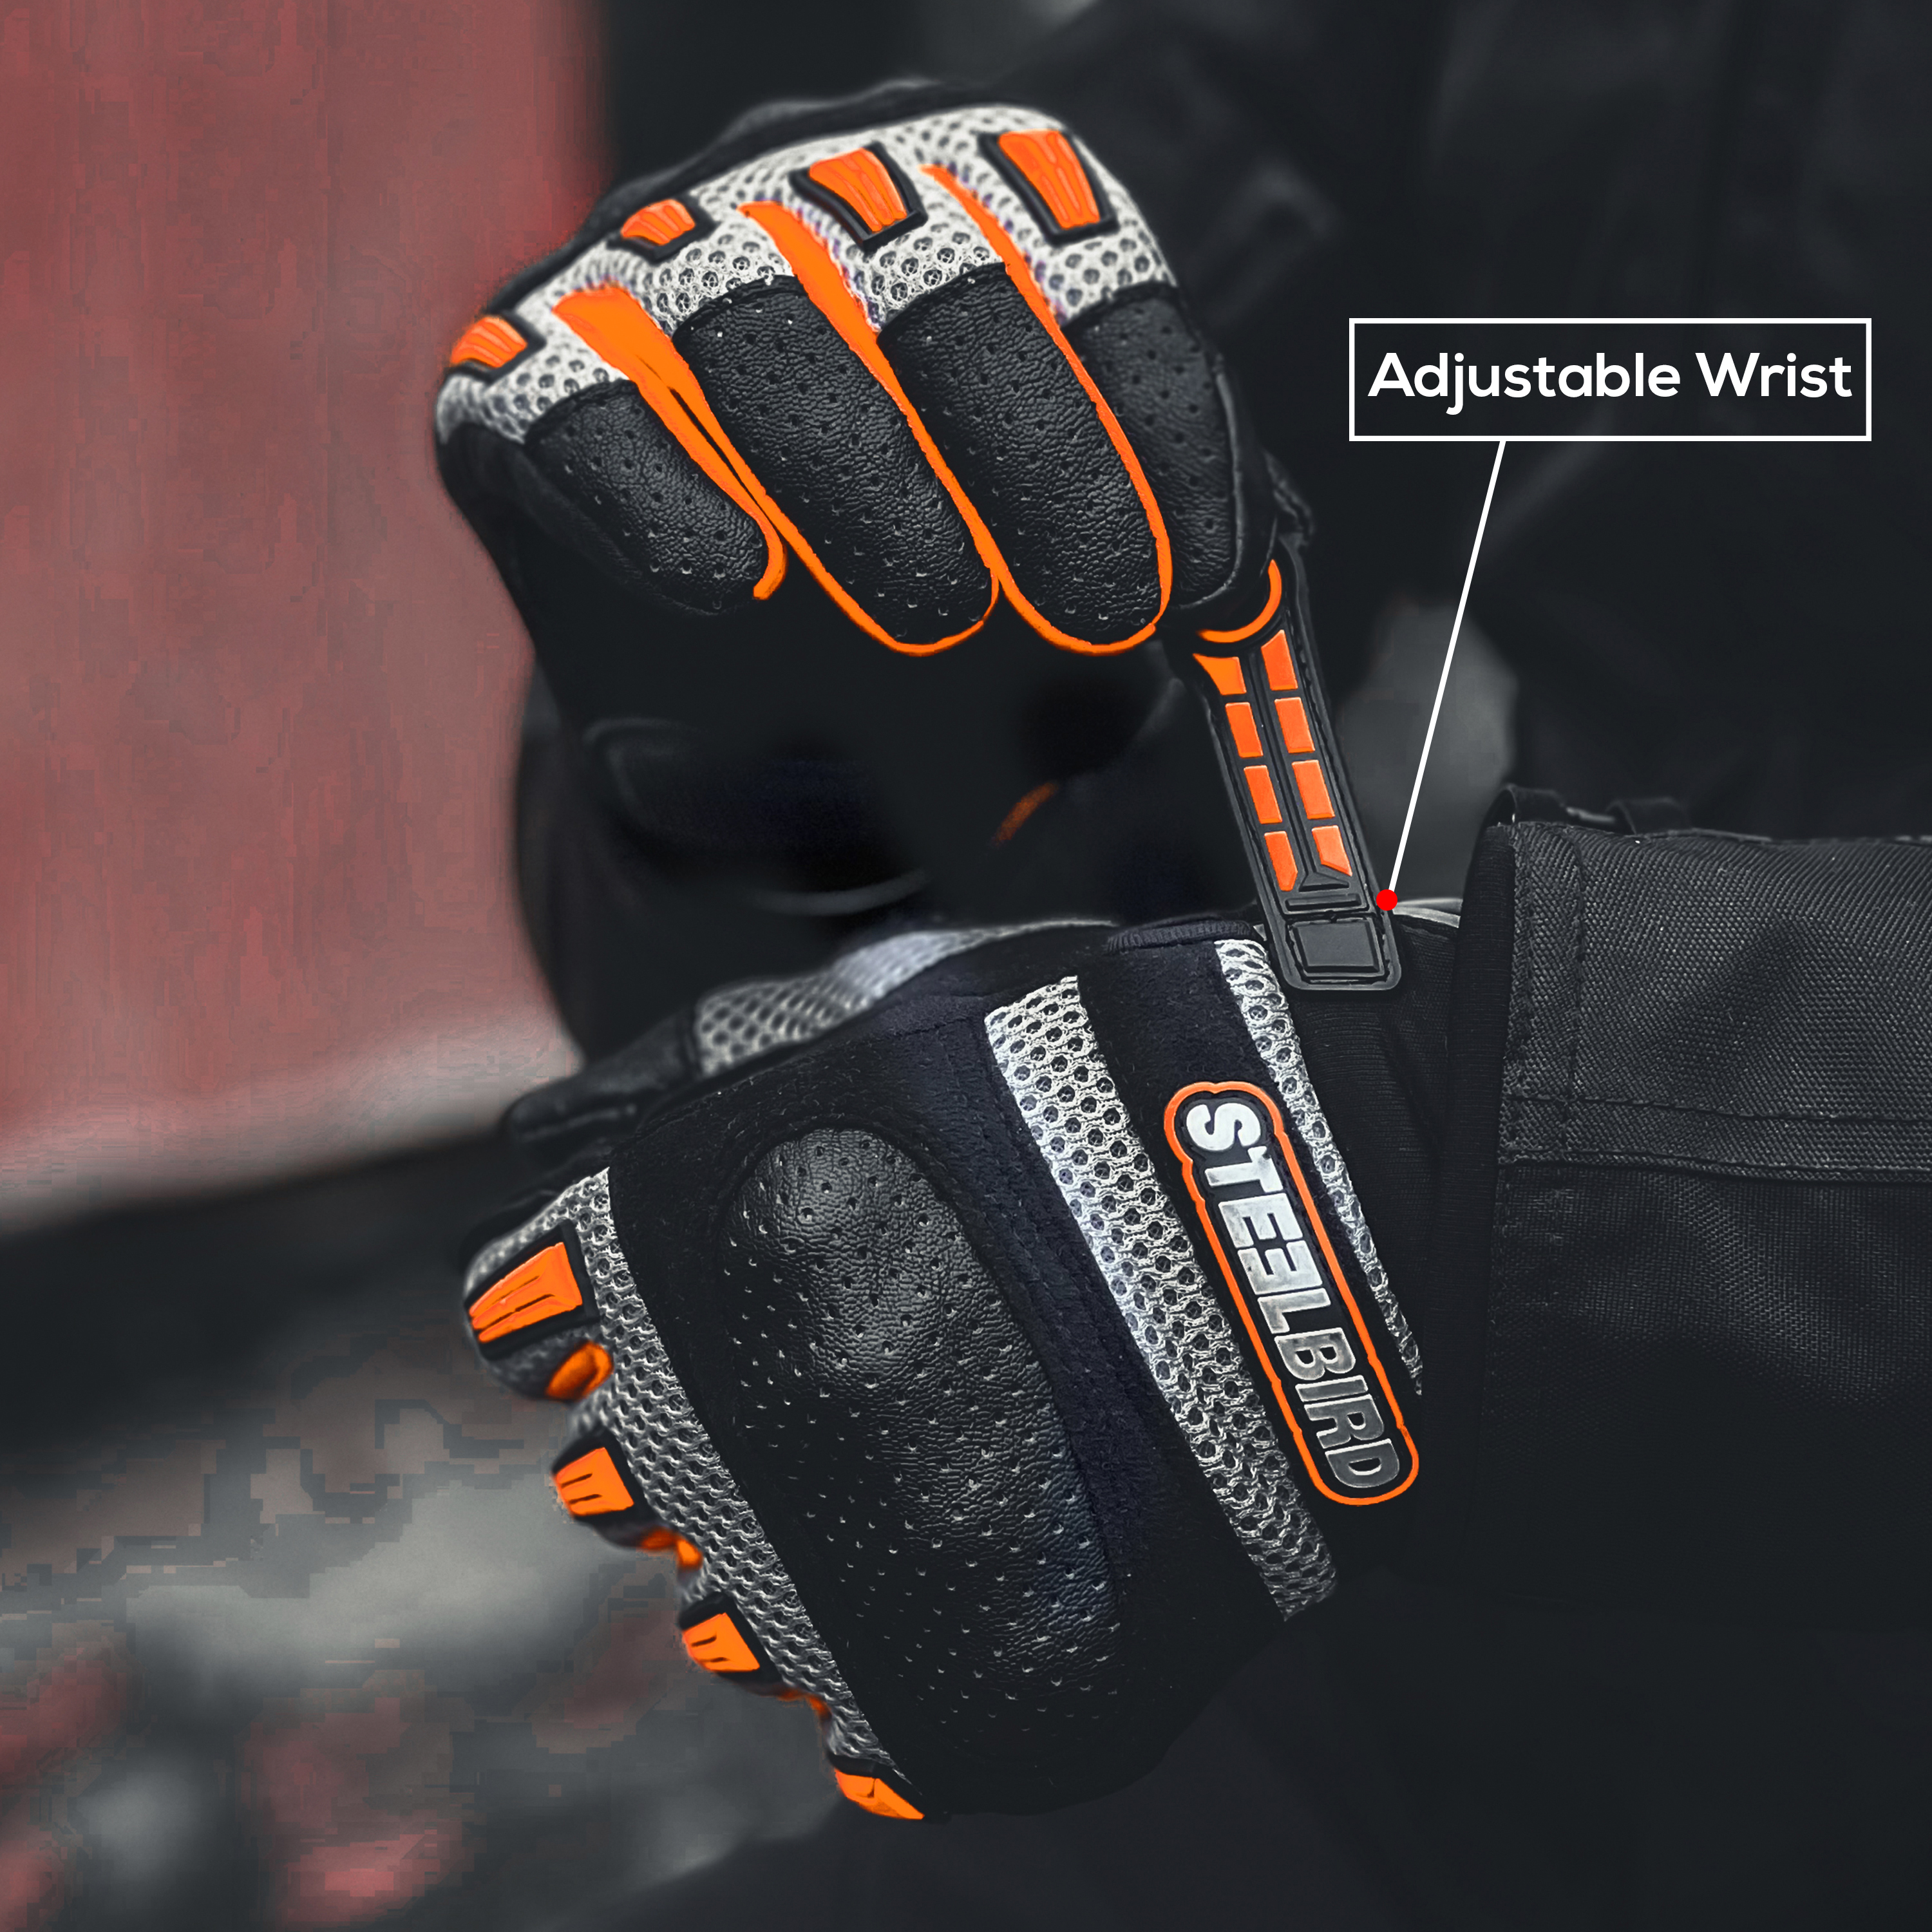 Steelbird Adventure A-1 Full Finger Riding Gloves With Touch Screen Sensitivity At Thumb & Index Finger, Protective Off-Road Motorbike Racing (Orange)